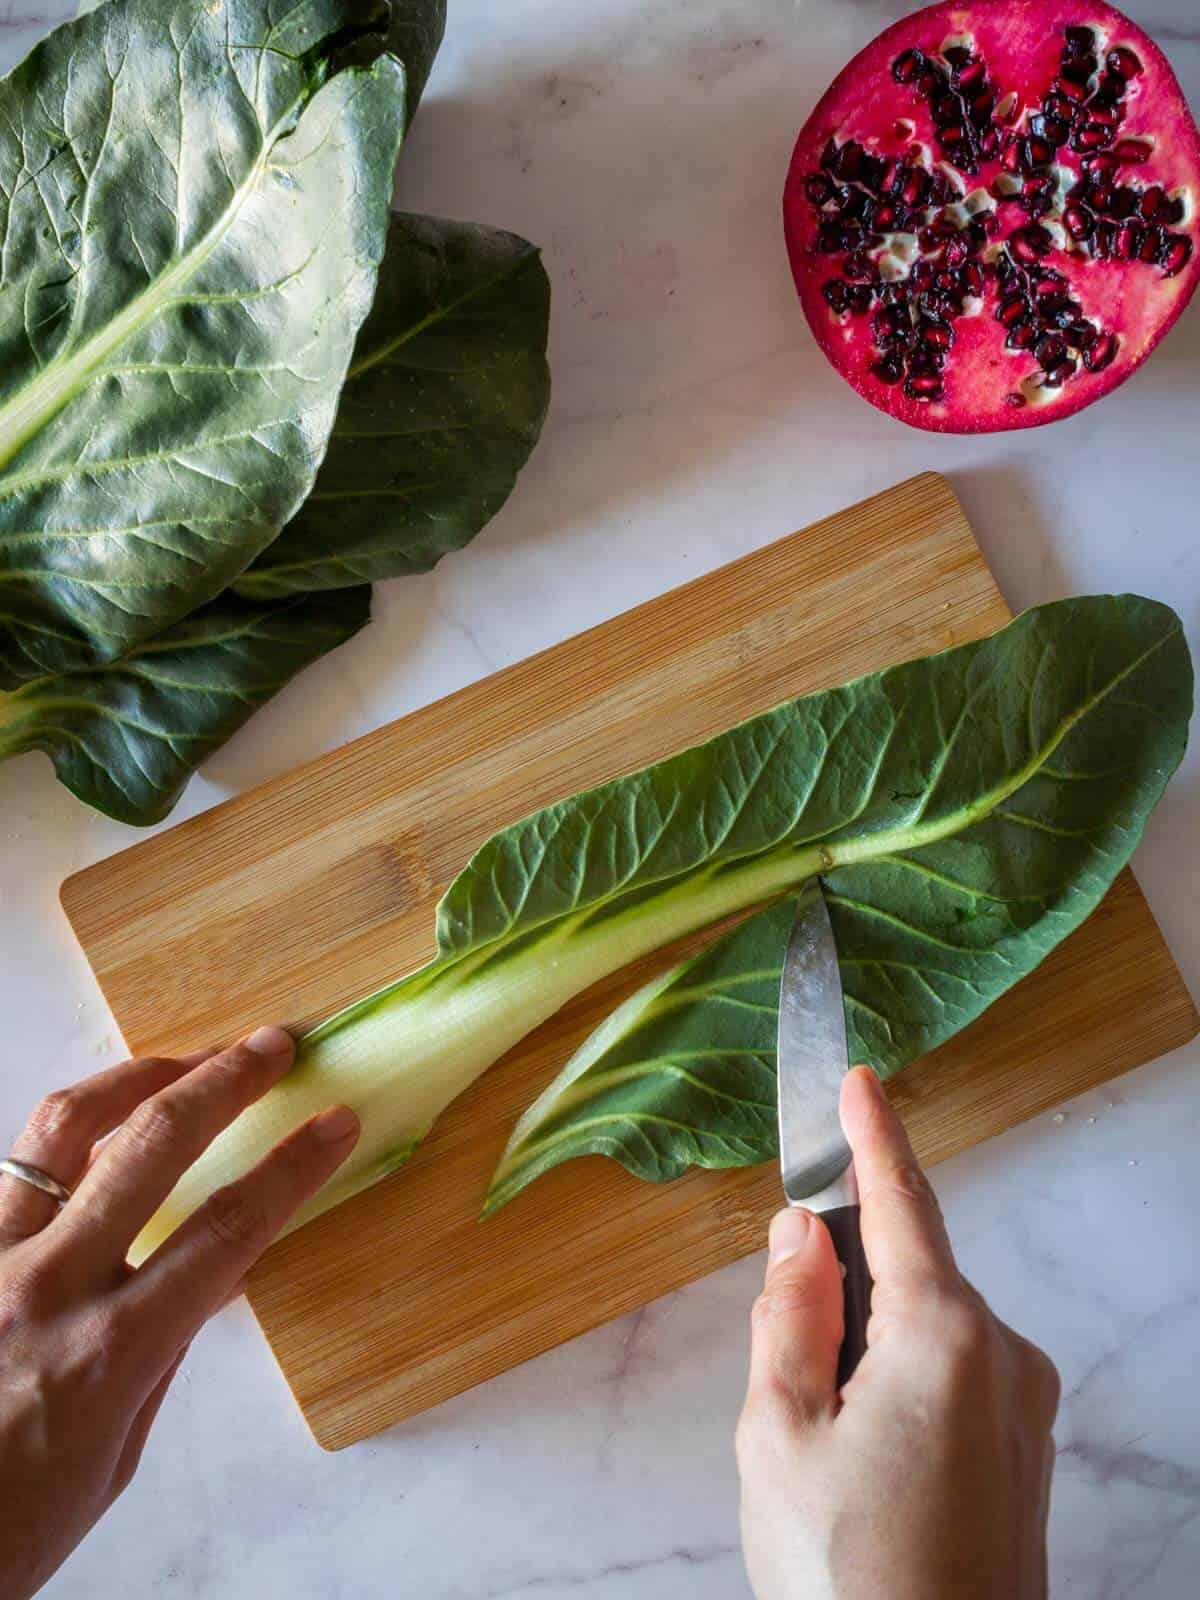 remove swiss chard stems for Green Smoothie